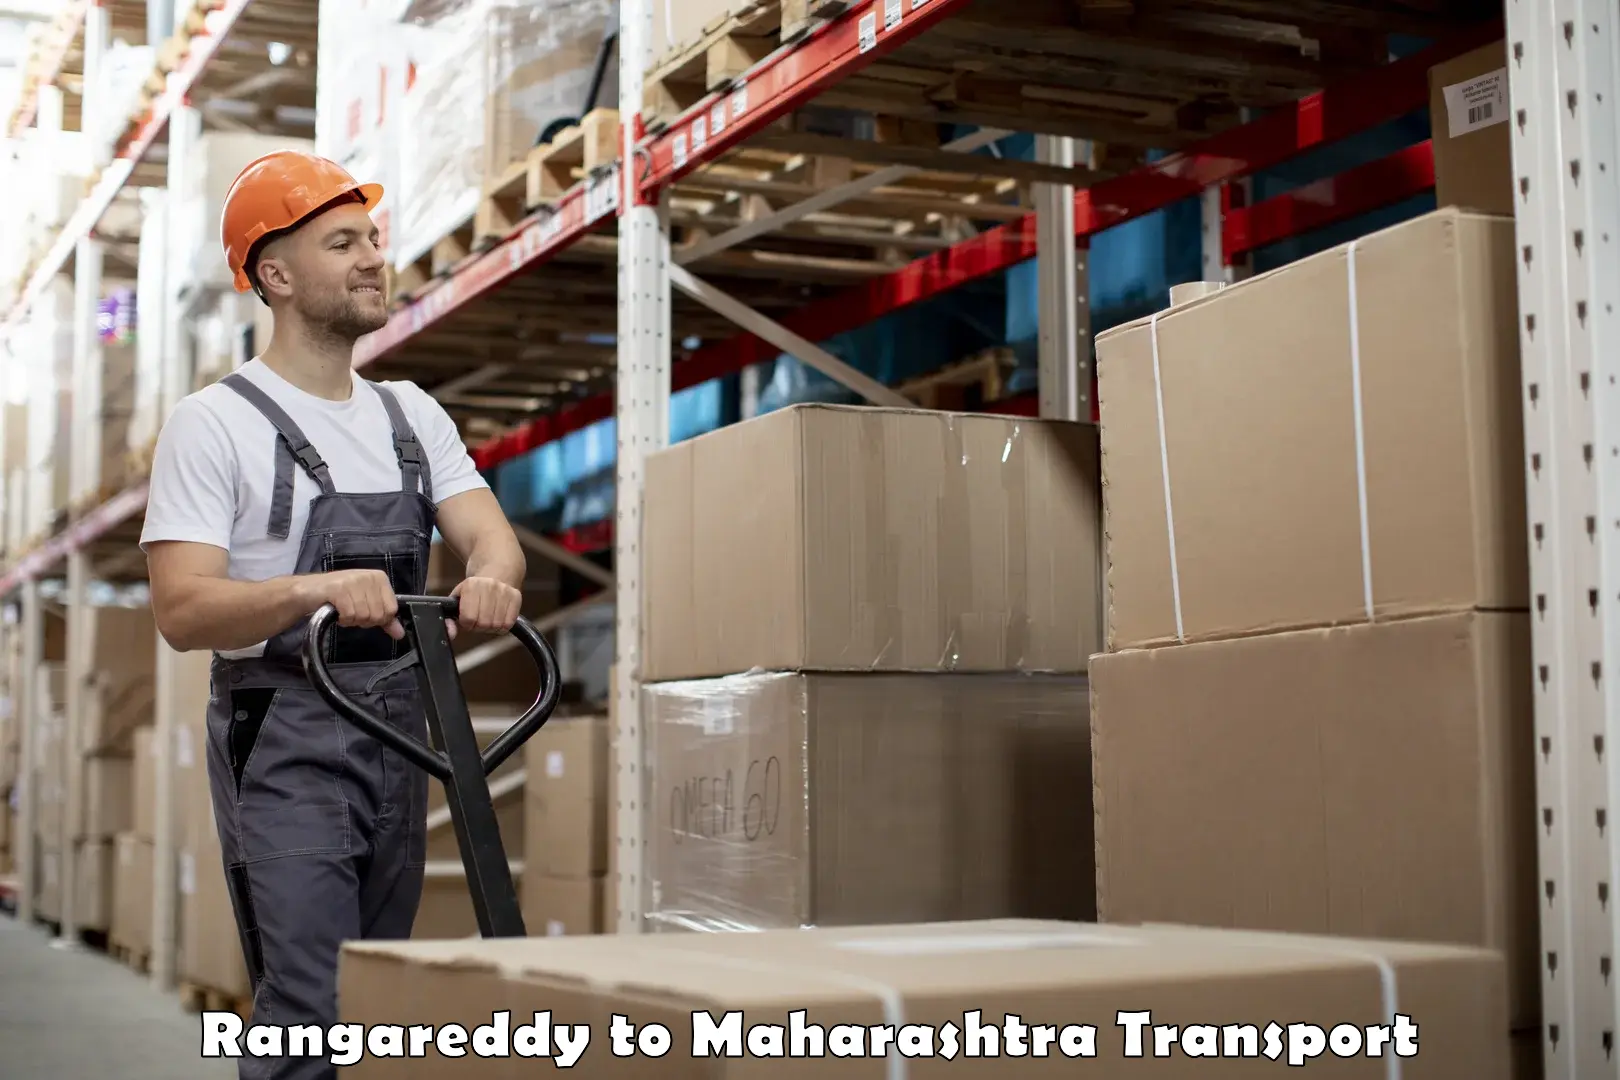 Goods delivery service Rangareddy to Chandwad